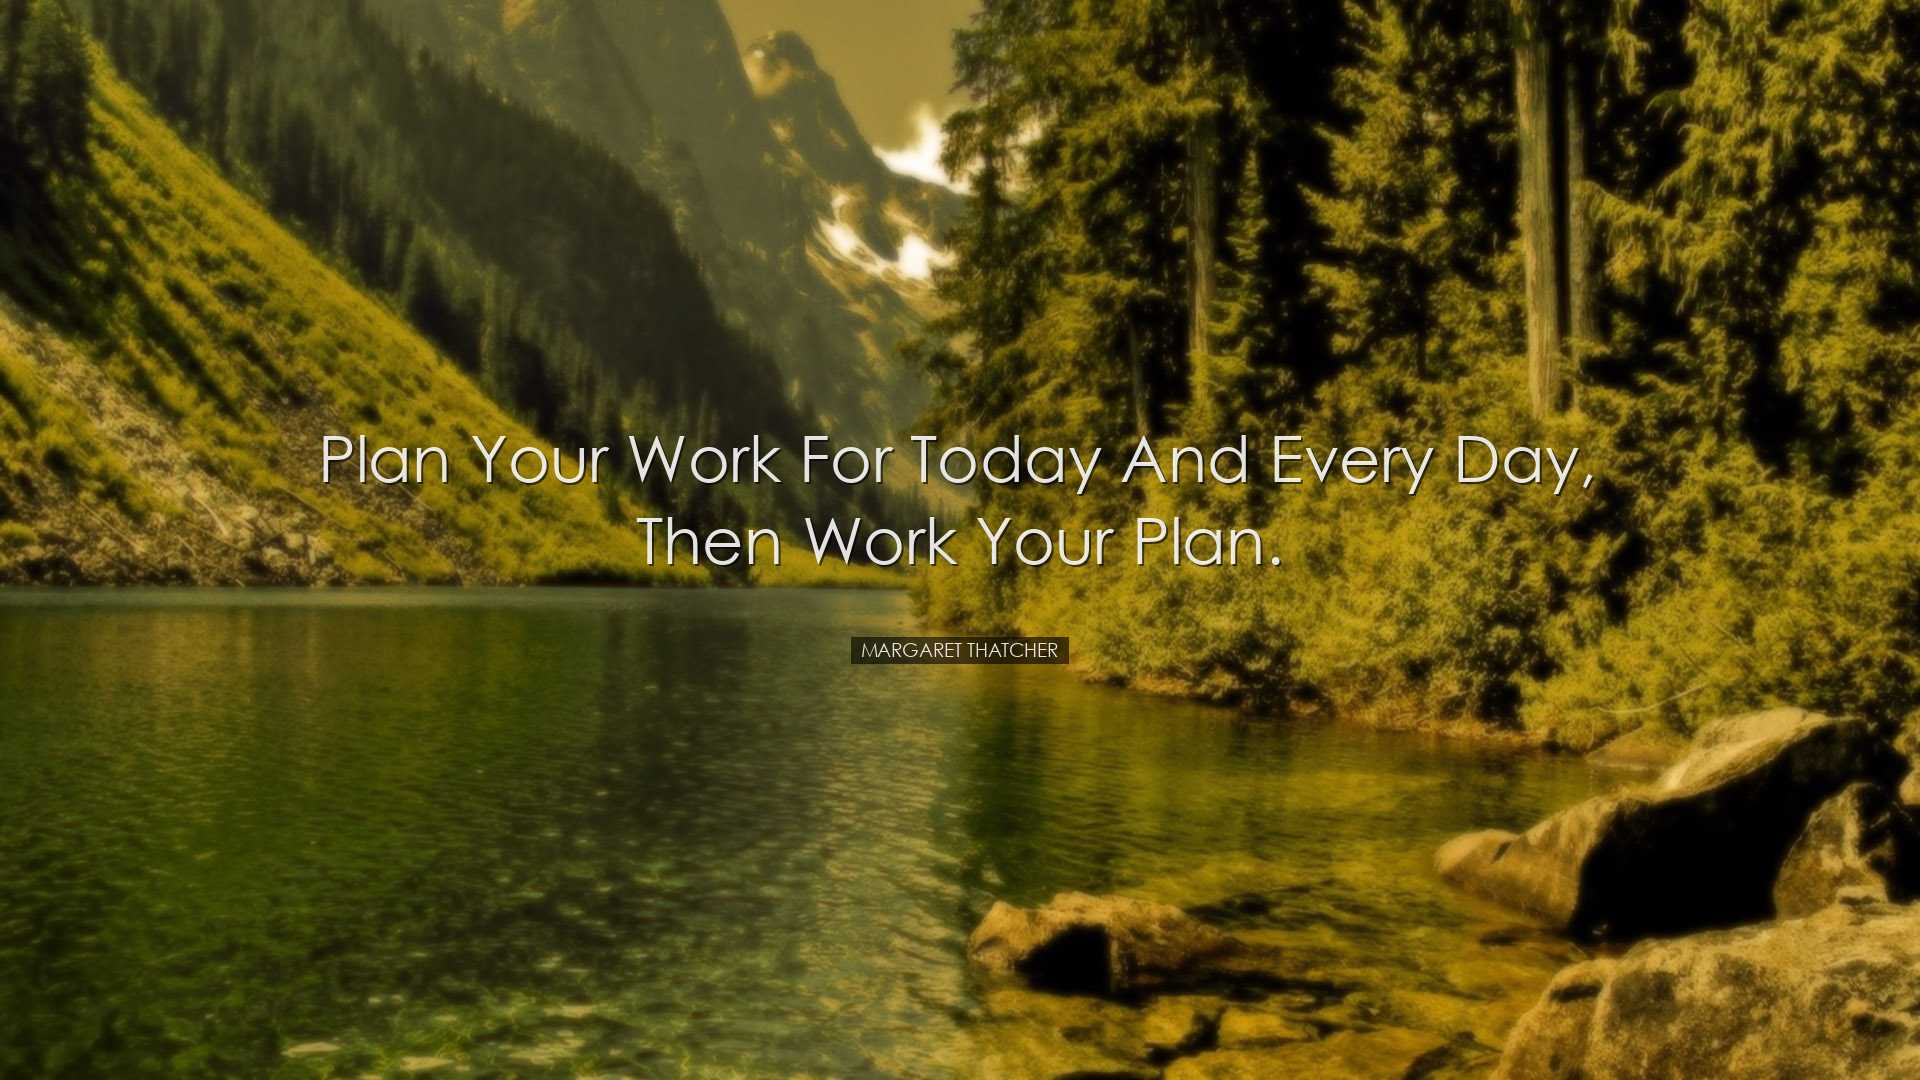 Plan your work for today and every day, then work your plan. - Mar